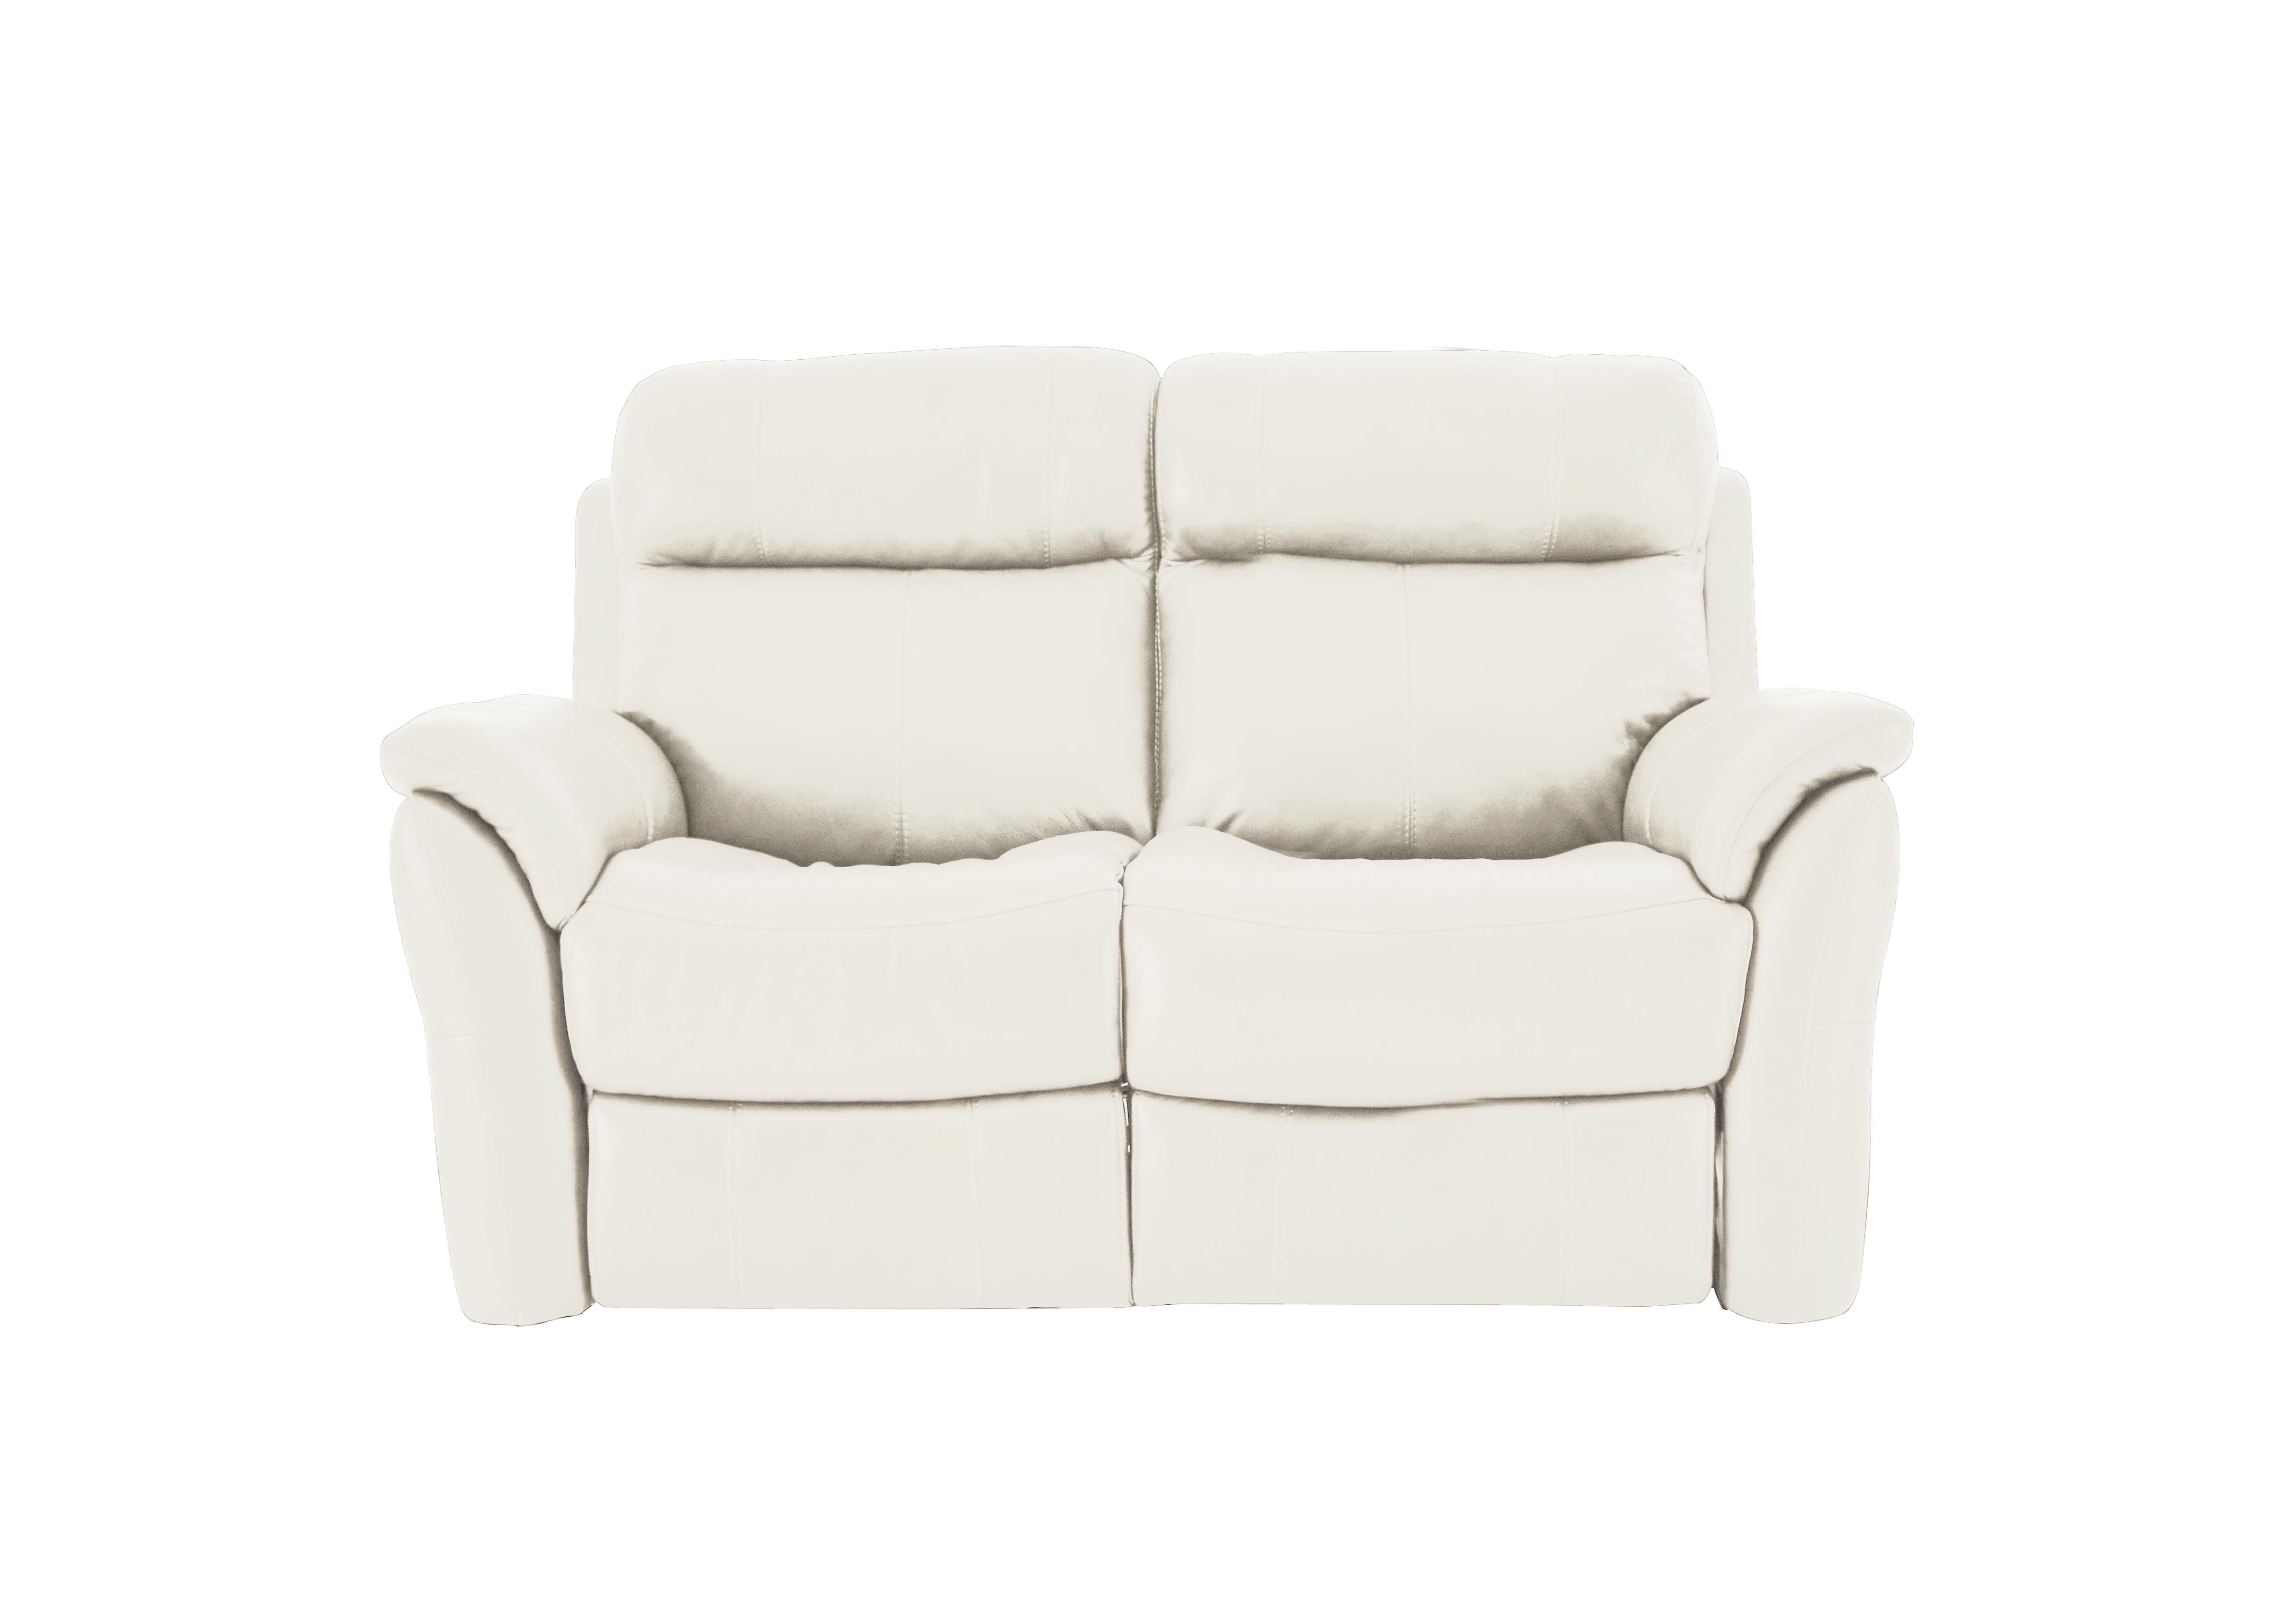 Relax Station Revive 2 Seater Leather Sofa in Bv-744d Star White on Furniture Village